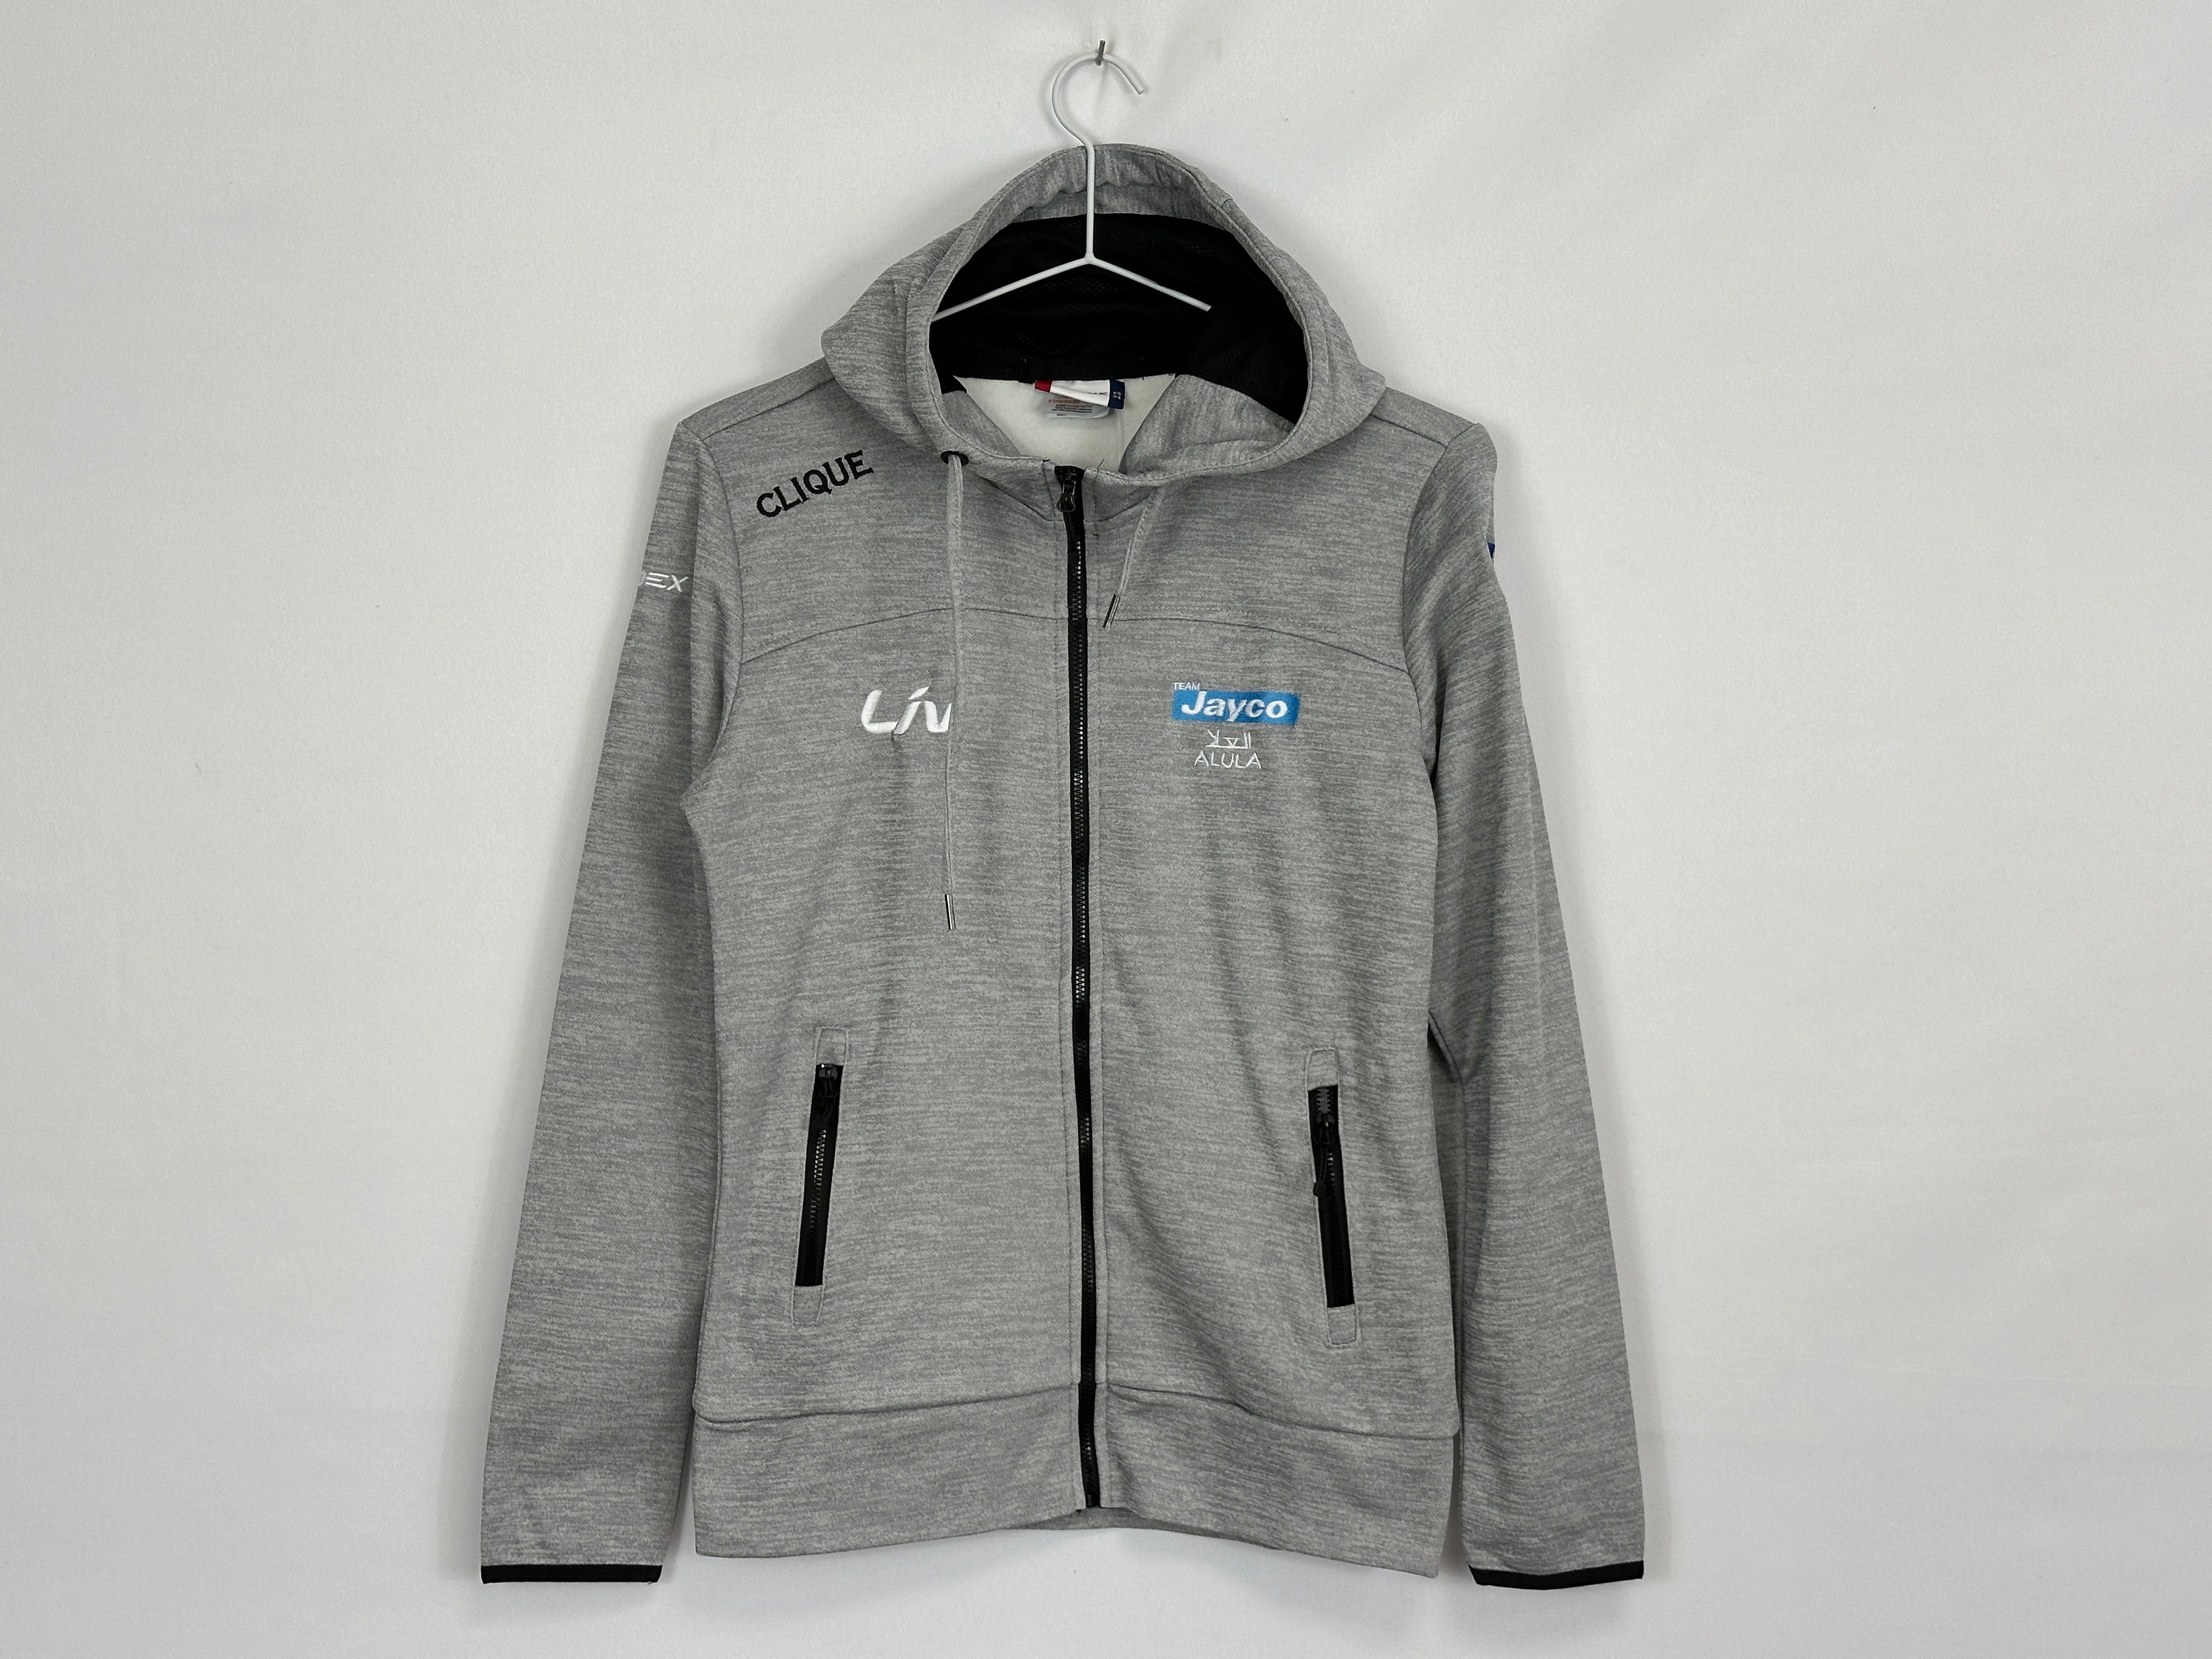 Team Jayco Alula - L/S Casual Hoodie by Clique